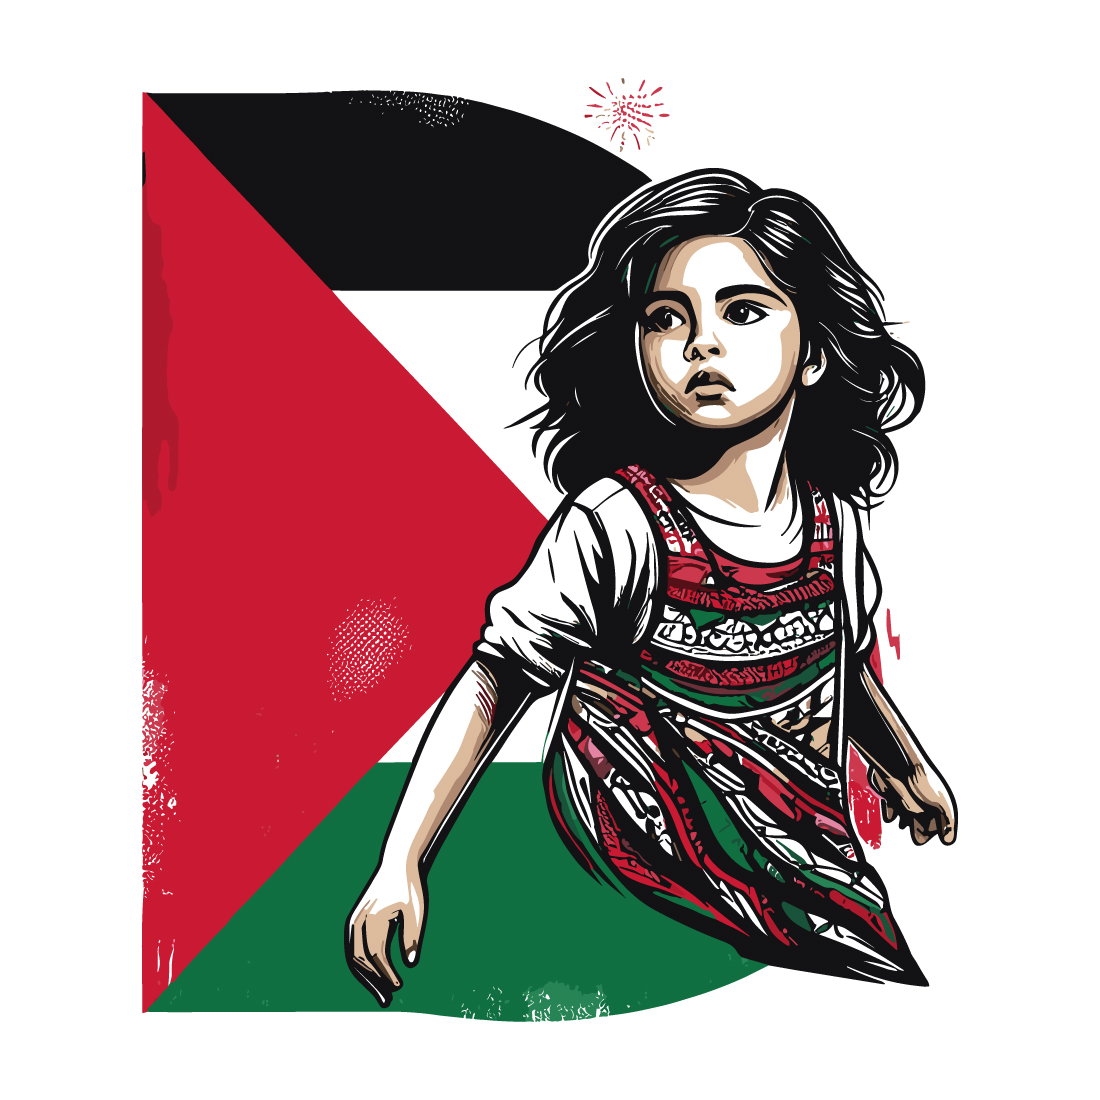 t-shirt depicting the suffering and struggle of Palestine with letter or flag cover image.